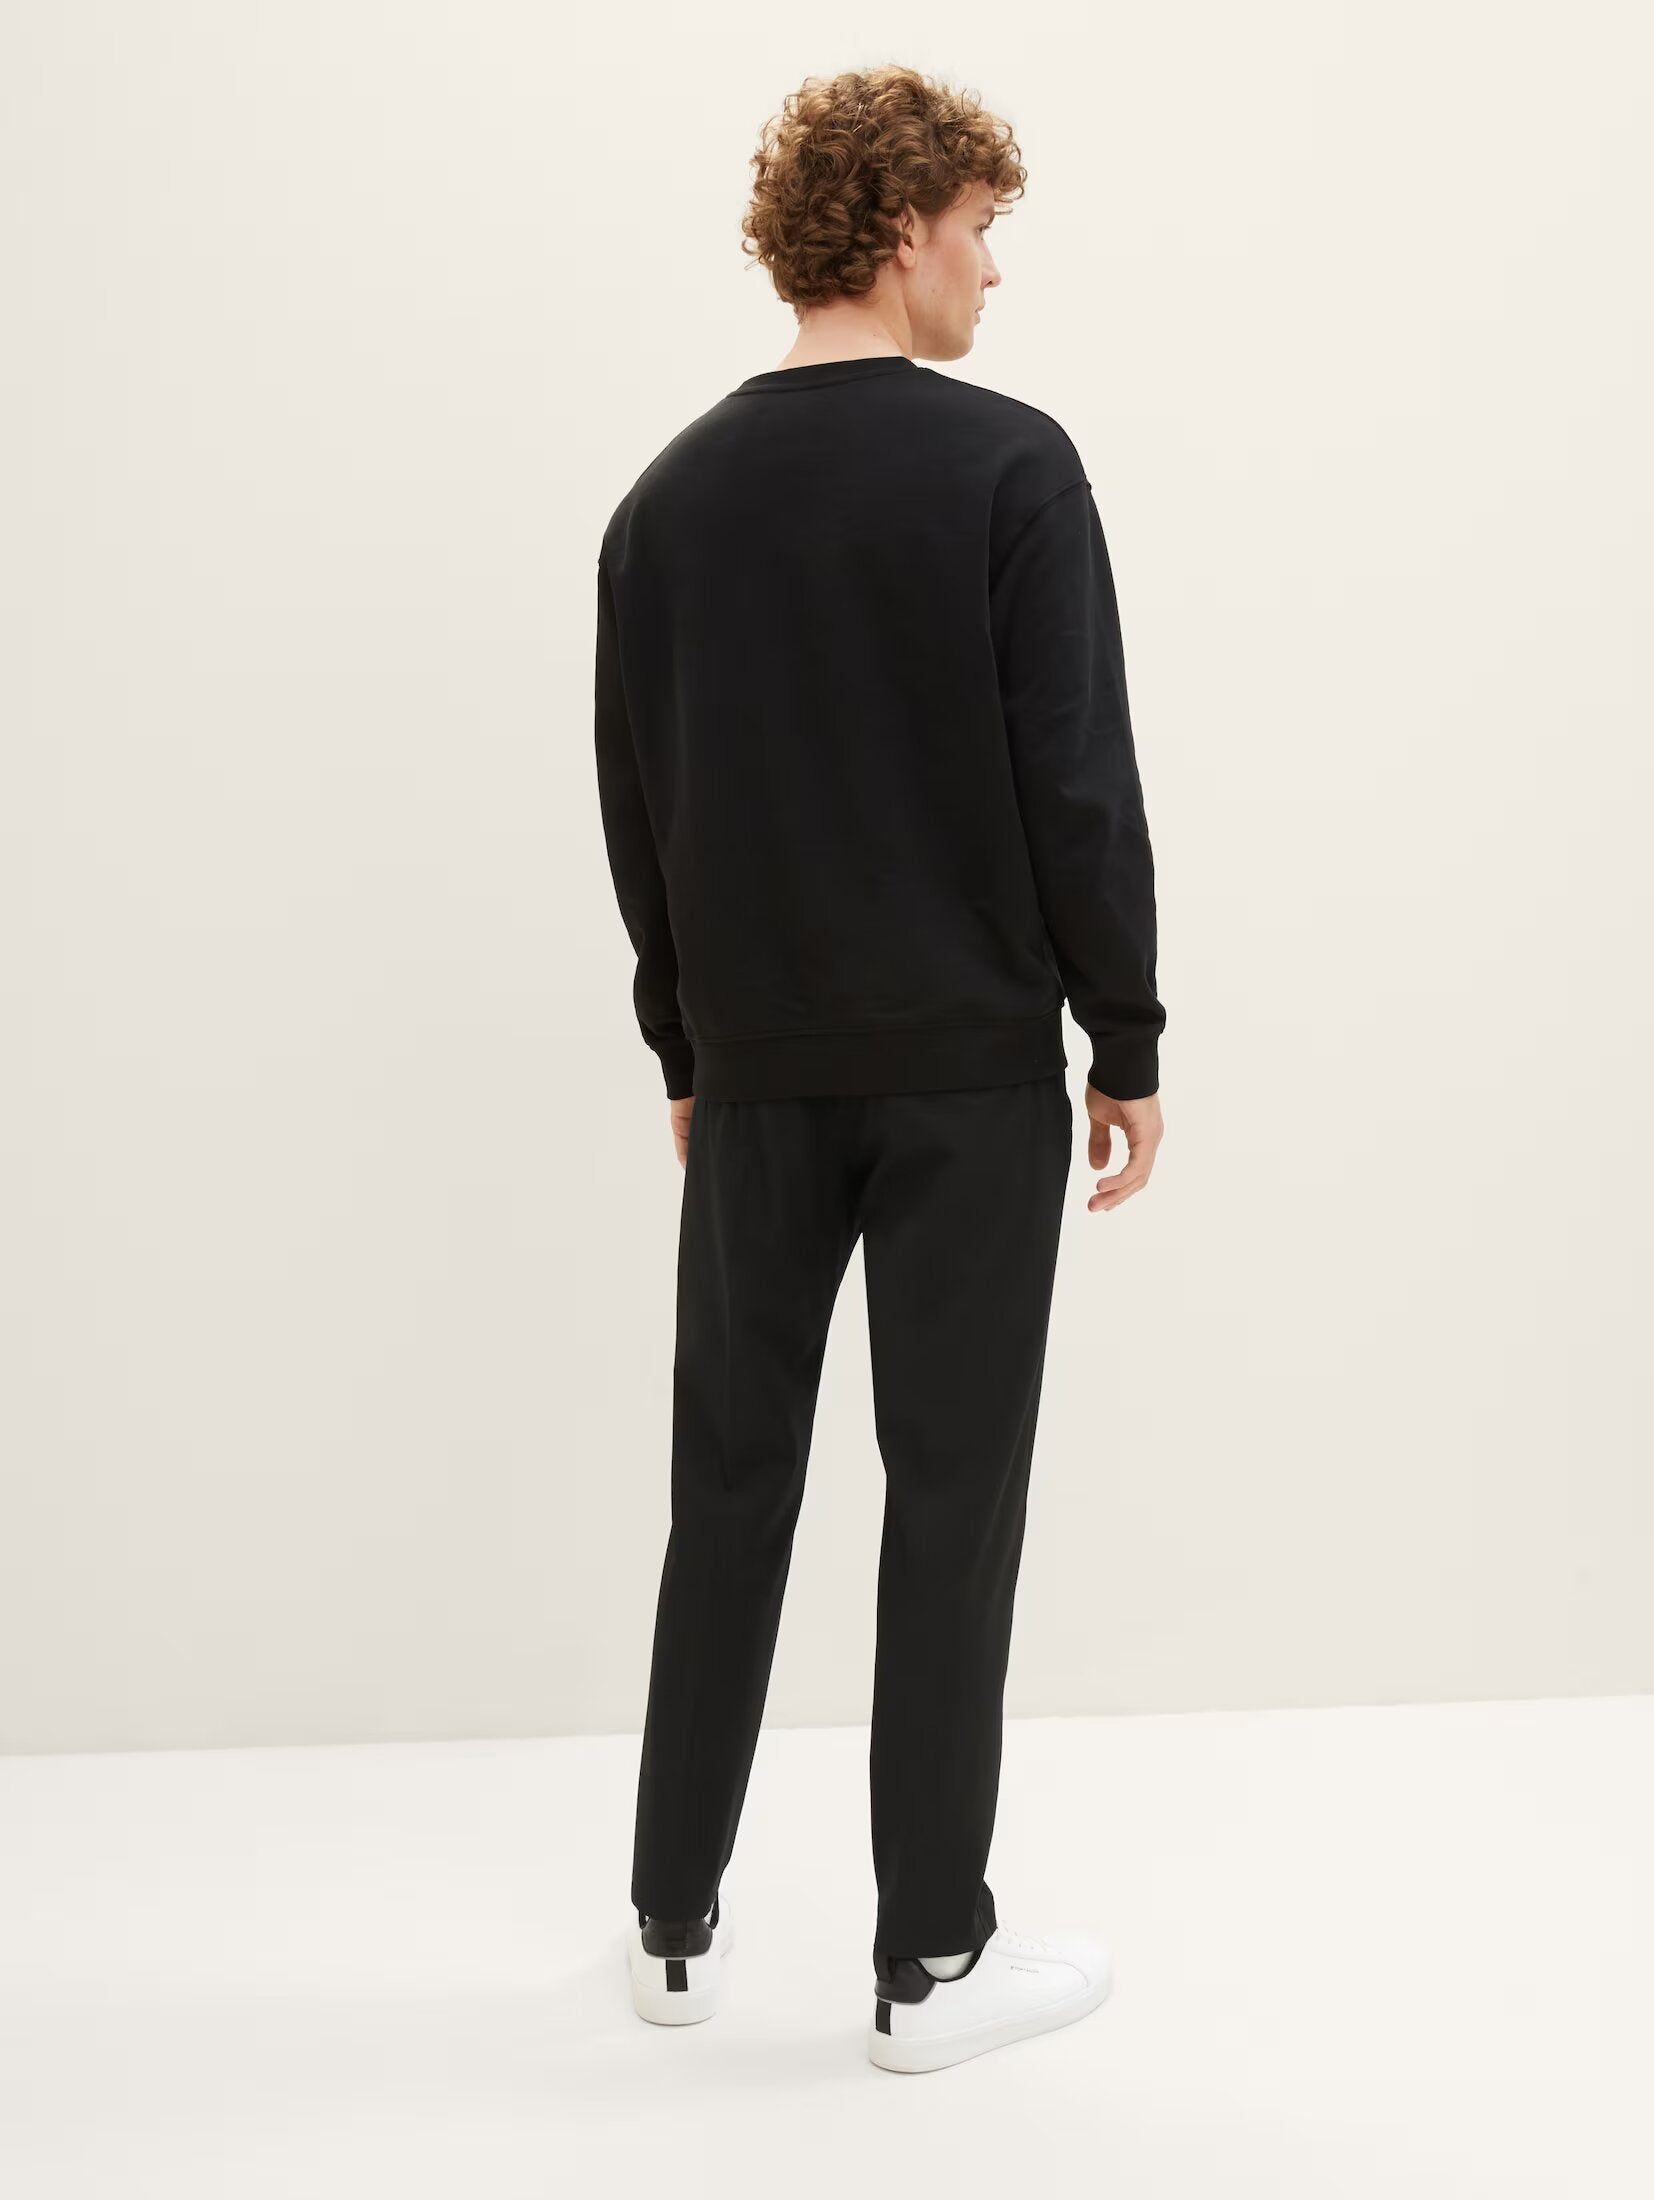 Tom Tailor Relaxed Tapered Black Chinos